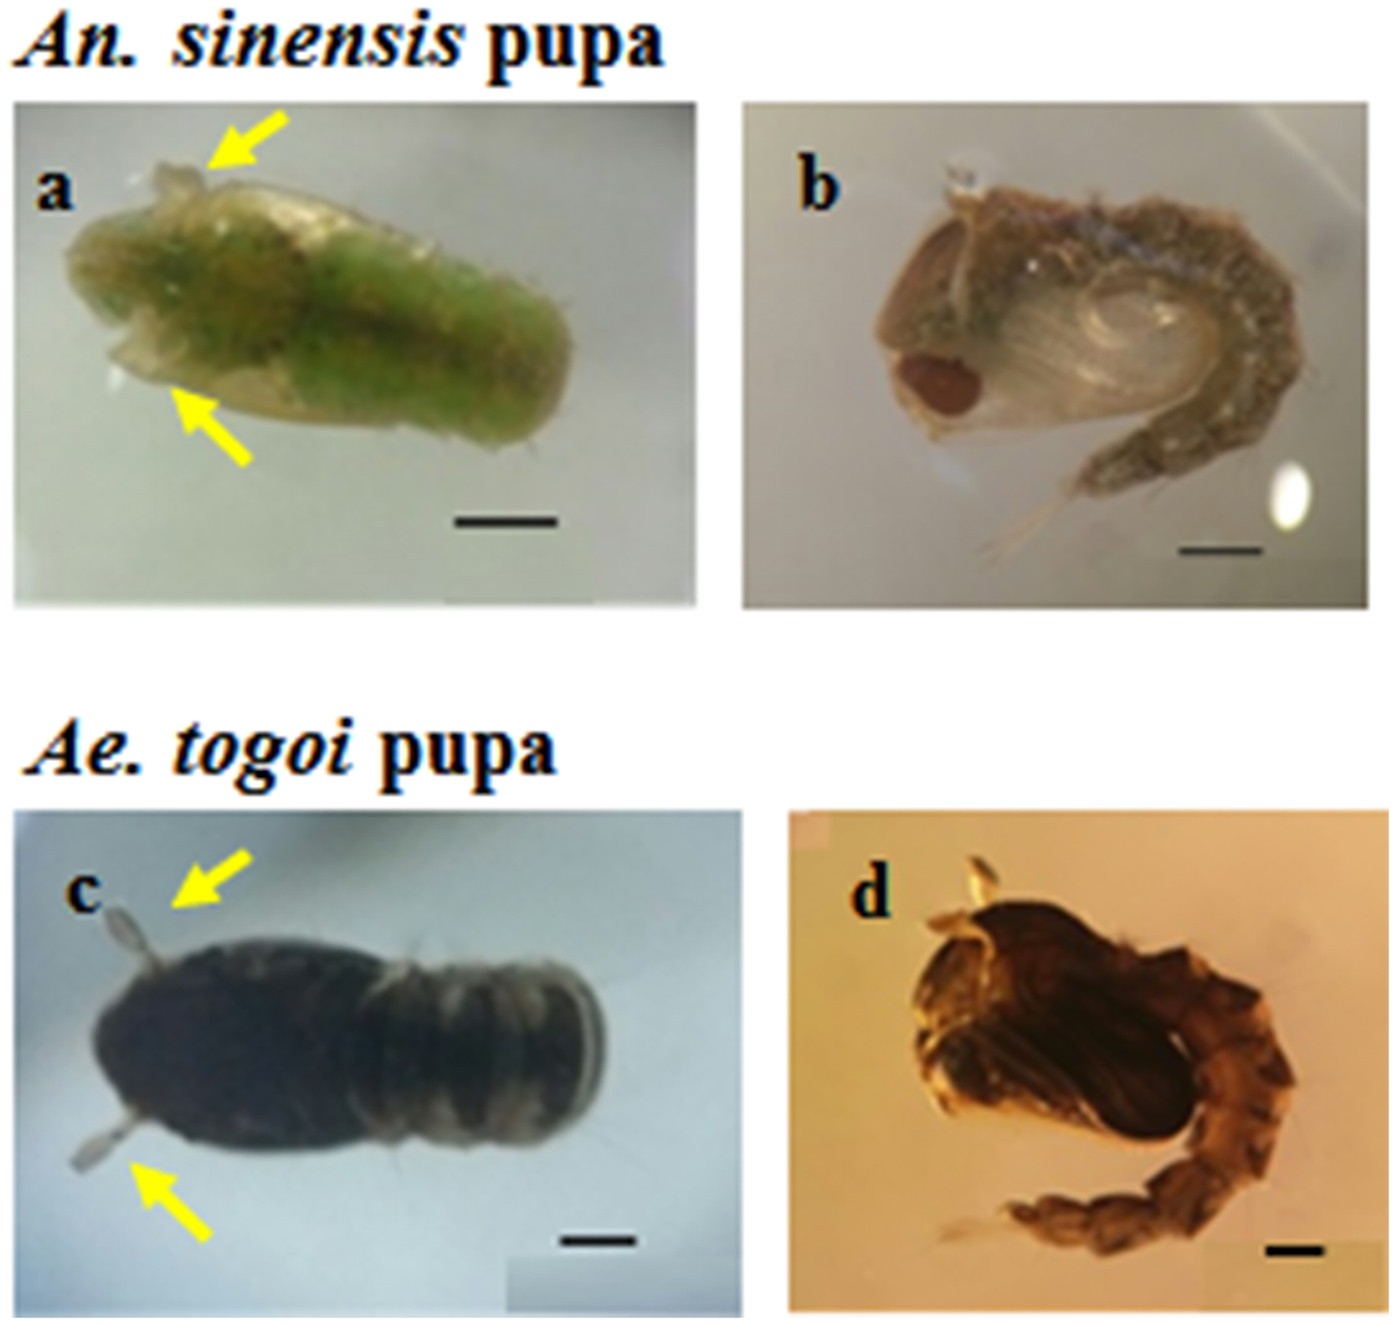 Three-dimensional structures of the tracheal systems of Anopheles sinensis  and Aedes togoi pupae | Scientific Reports